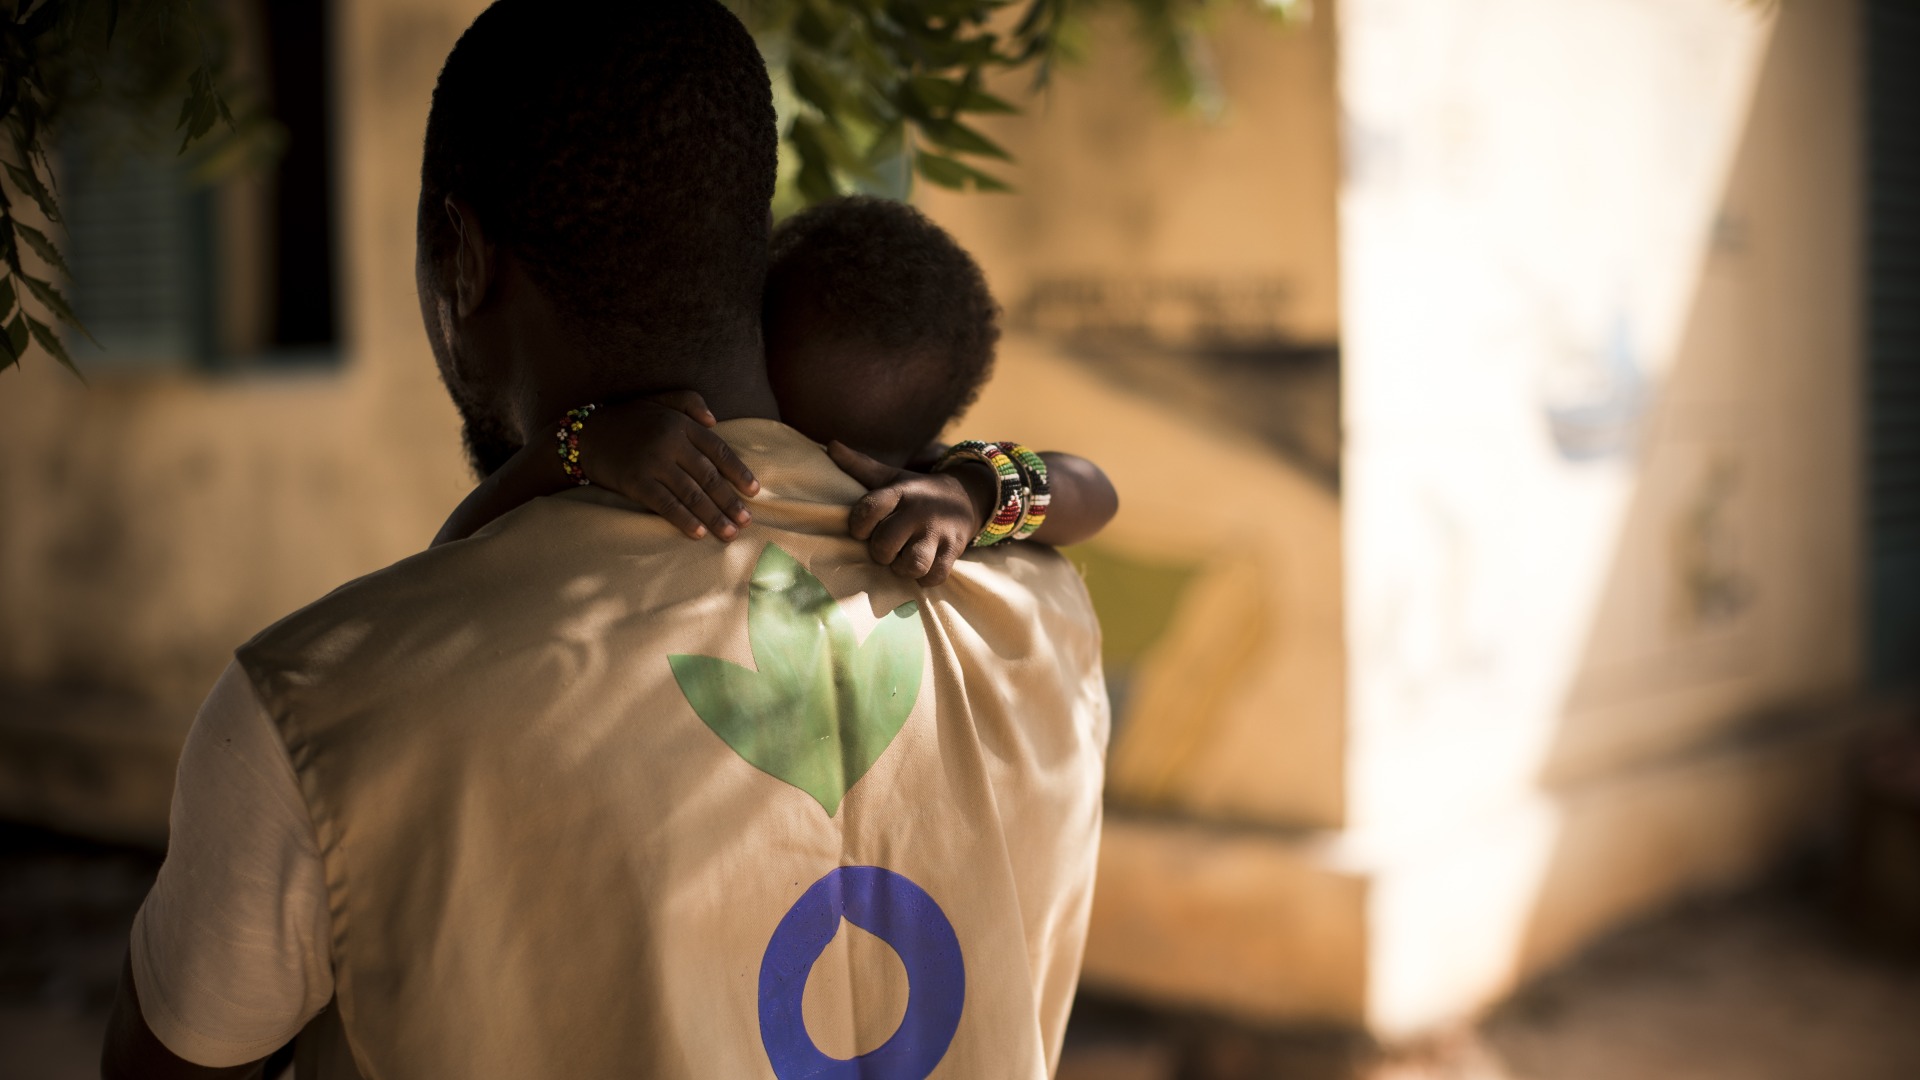 An Action Against Hunger Aid Worker holds a child in his arms in Mali.